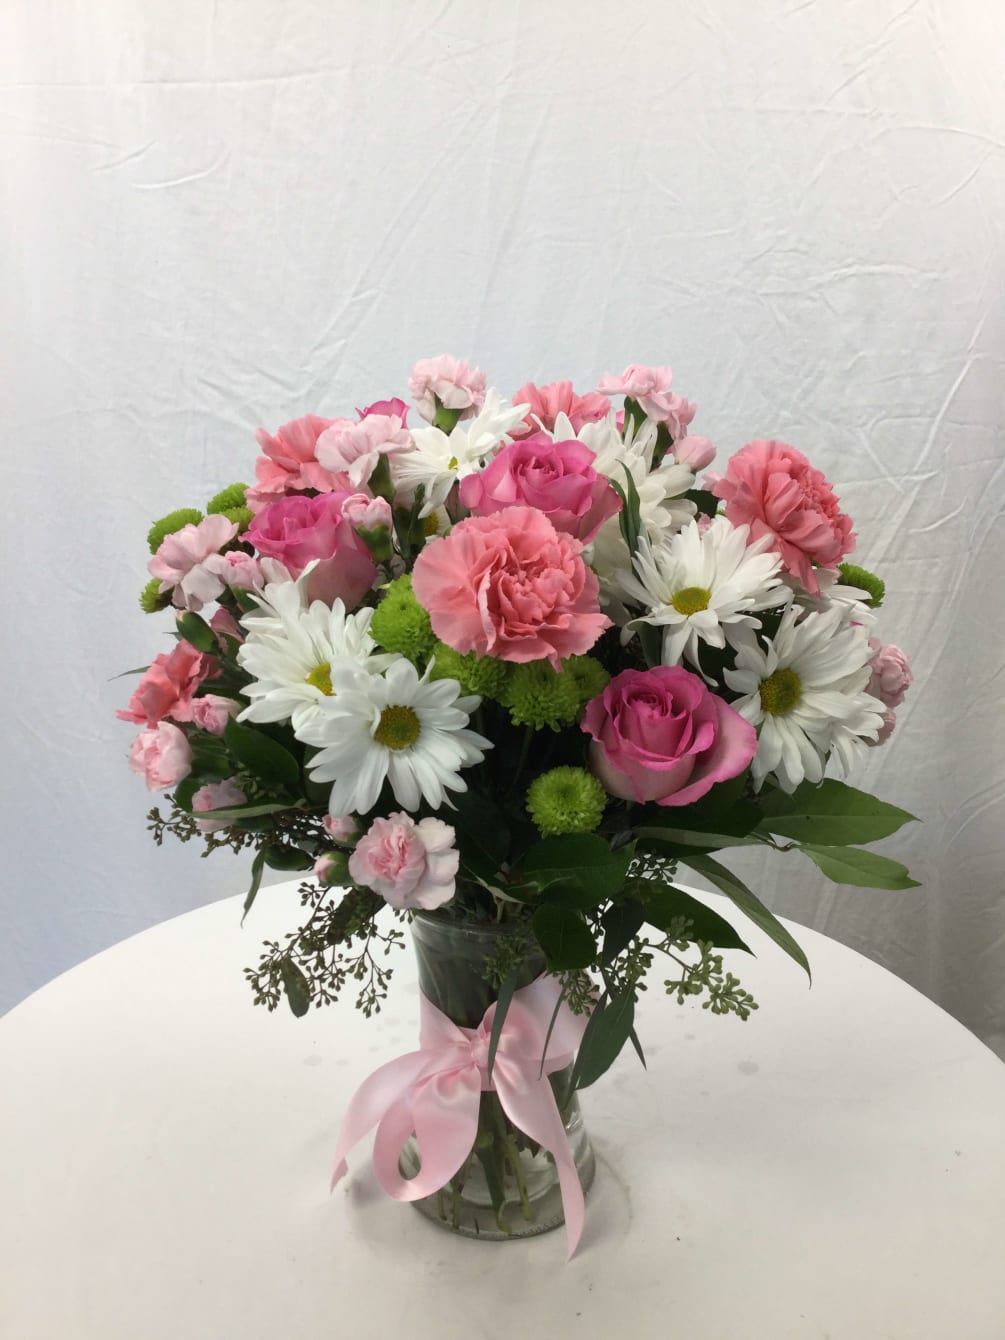 This beautiful pink and white bouquet makes for a wonderful gift for